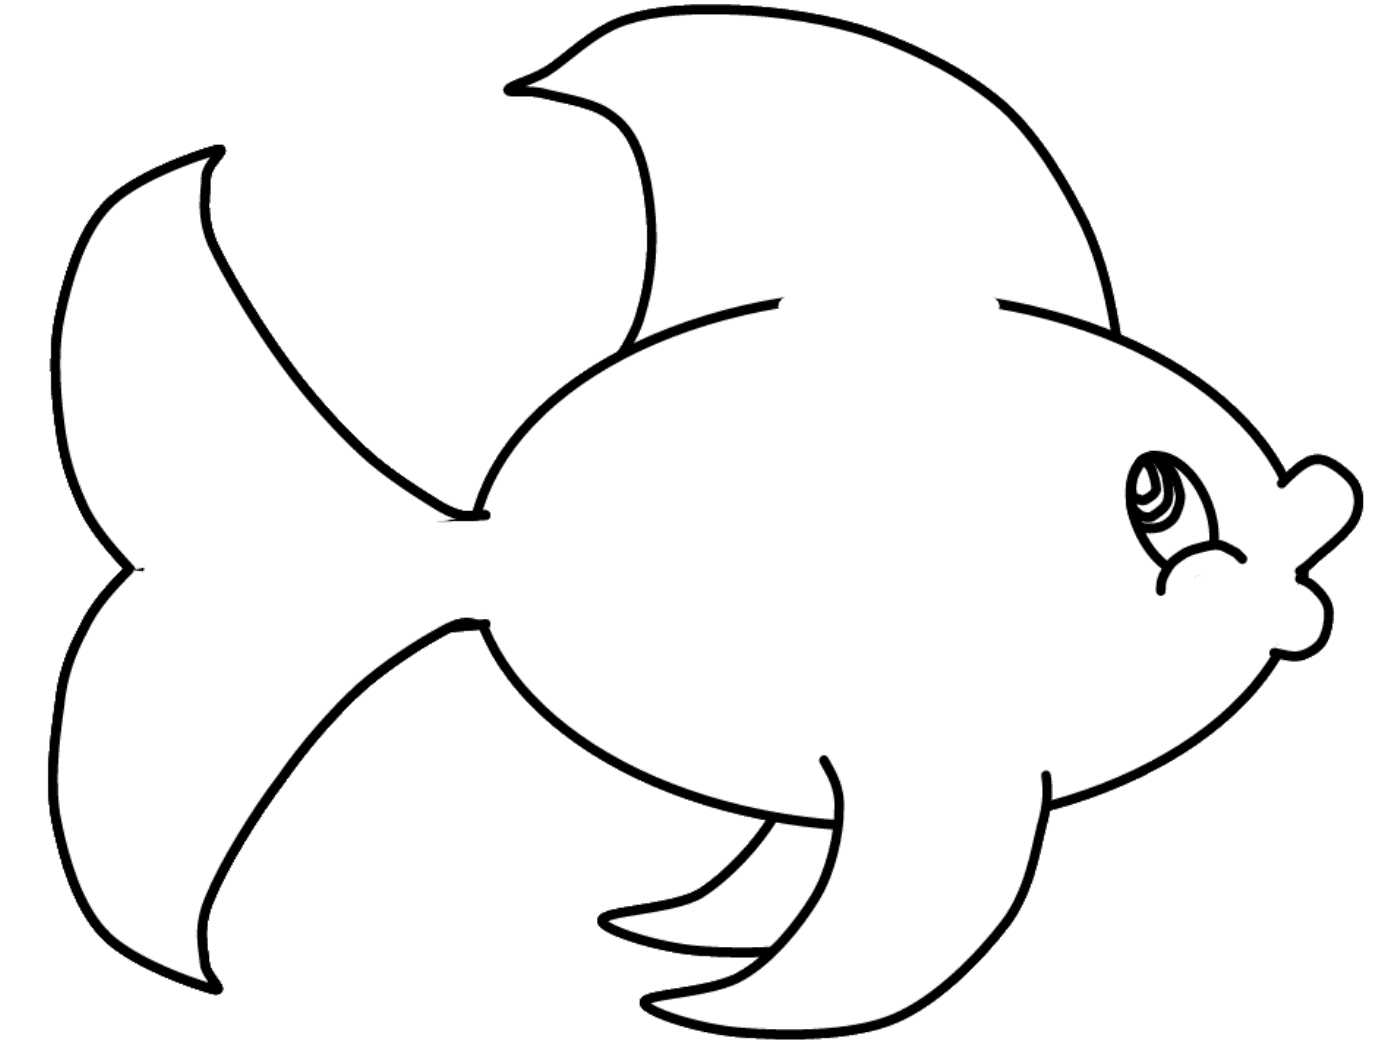 Coloring Pages Luxury Fish Drawings For Kids Simple - Clown Fish To Color  Transparent PNG - 600x721 - Free Download on NicePNG